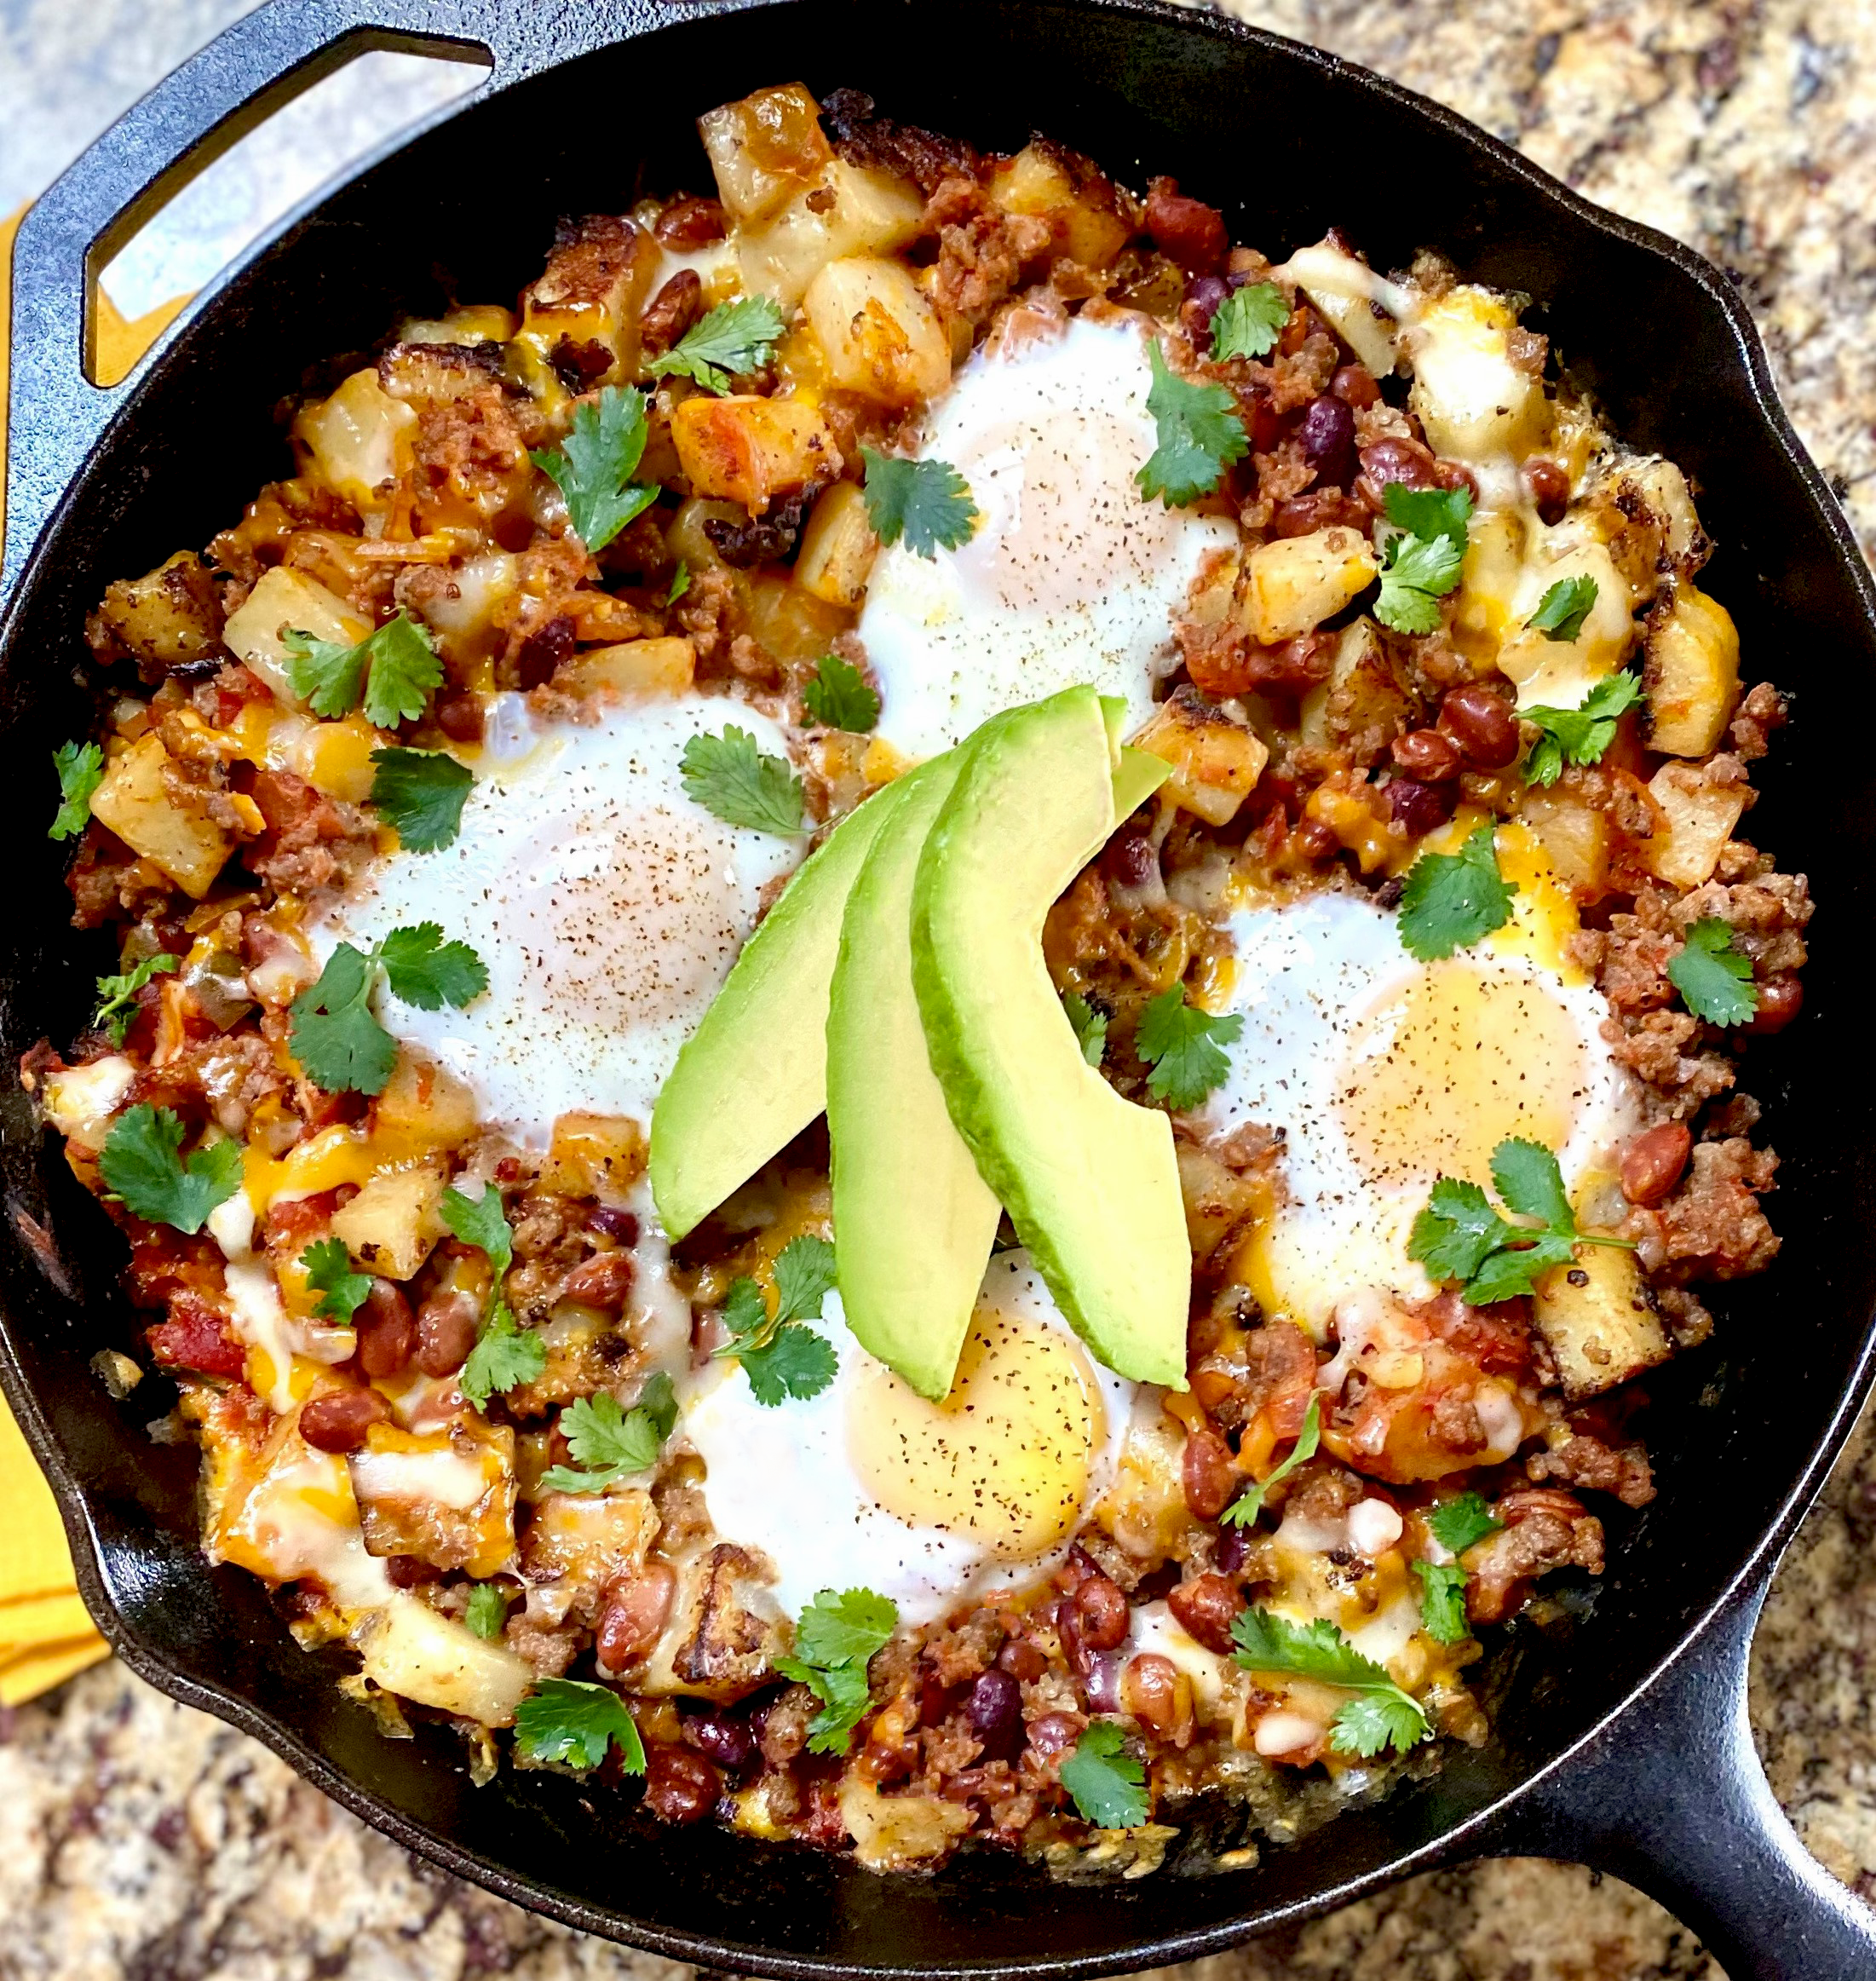 https://www.cookingmamas.com/wp-content/uploads/2021/01/Hearty-Breakfast-Skillet-3.png